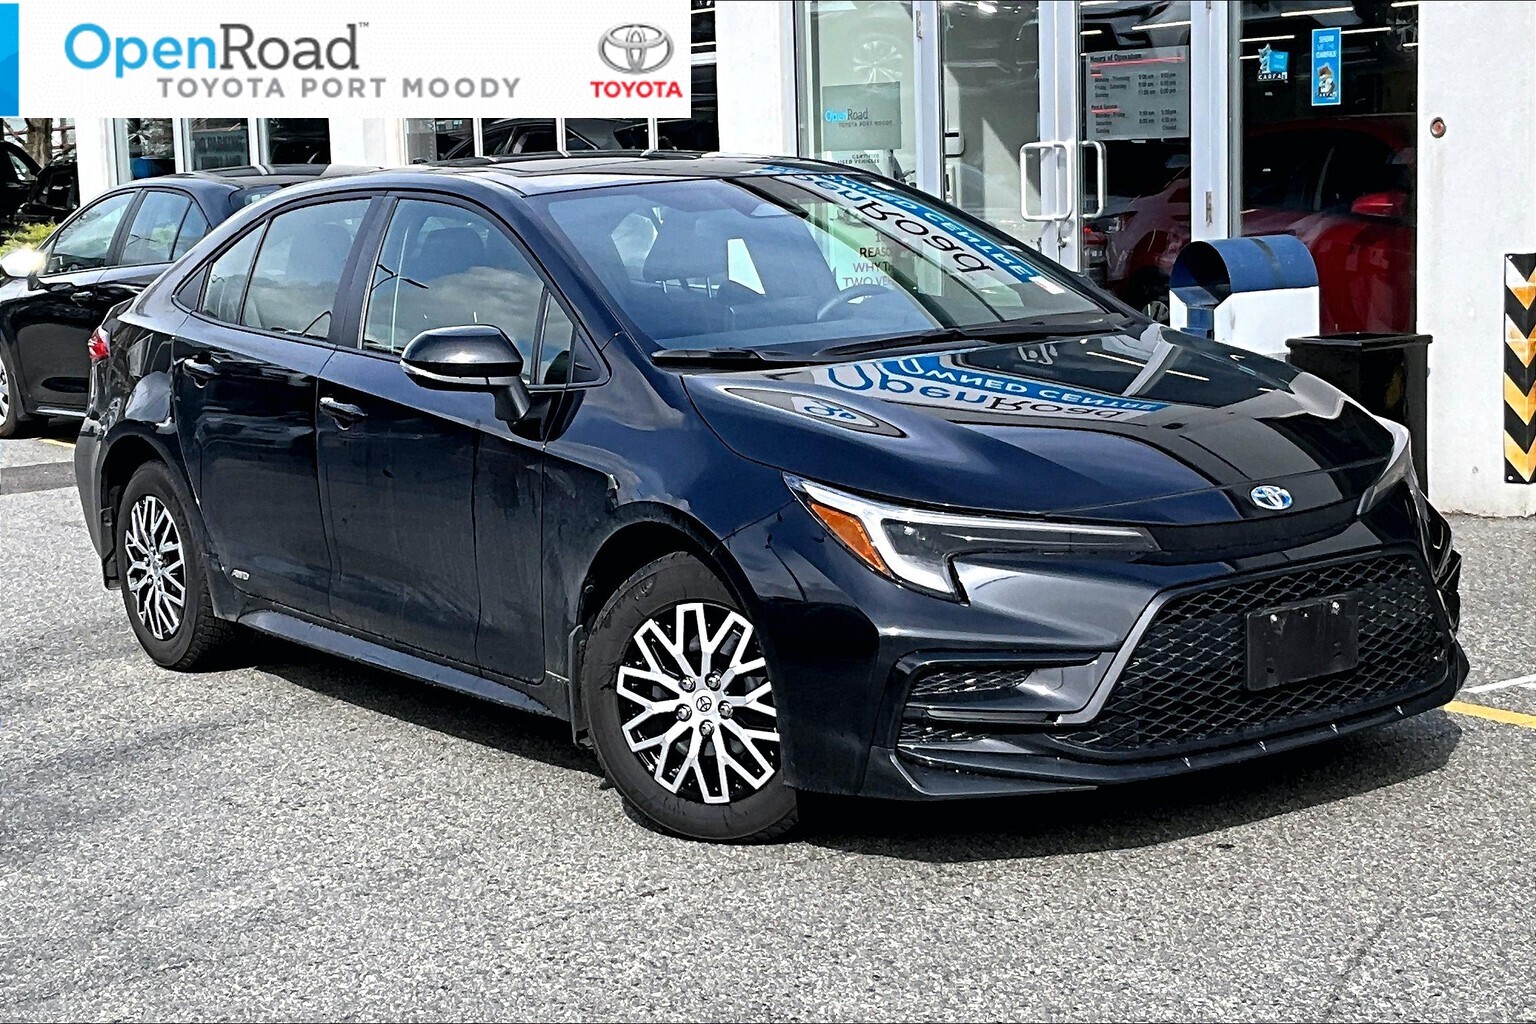 2023 Toyota Corolla Hybrid SE AWD |OpenRoad True Price |Local |One Owner |Ser